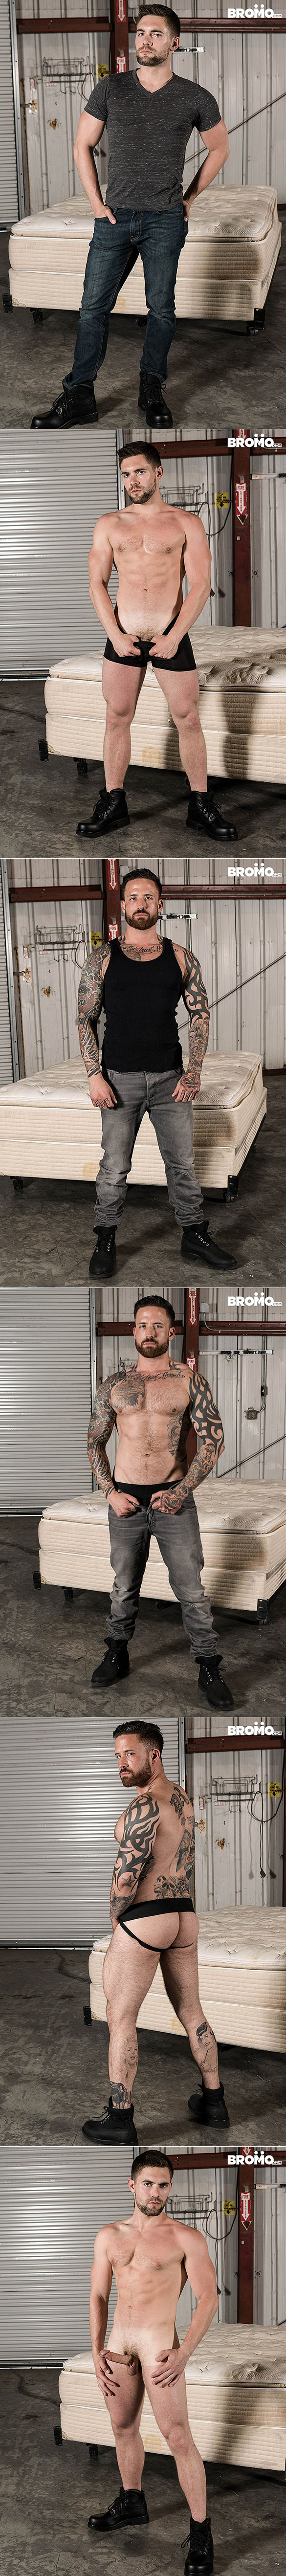 Bromo: Jordan Levine bangs Griffin Barrows in "Warehouse Chronicles: Spanked Raw"